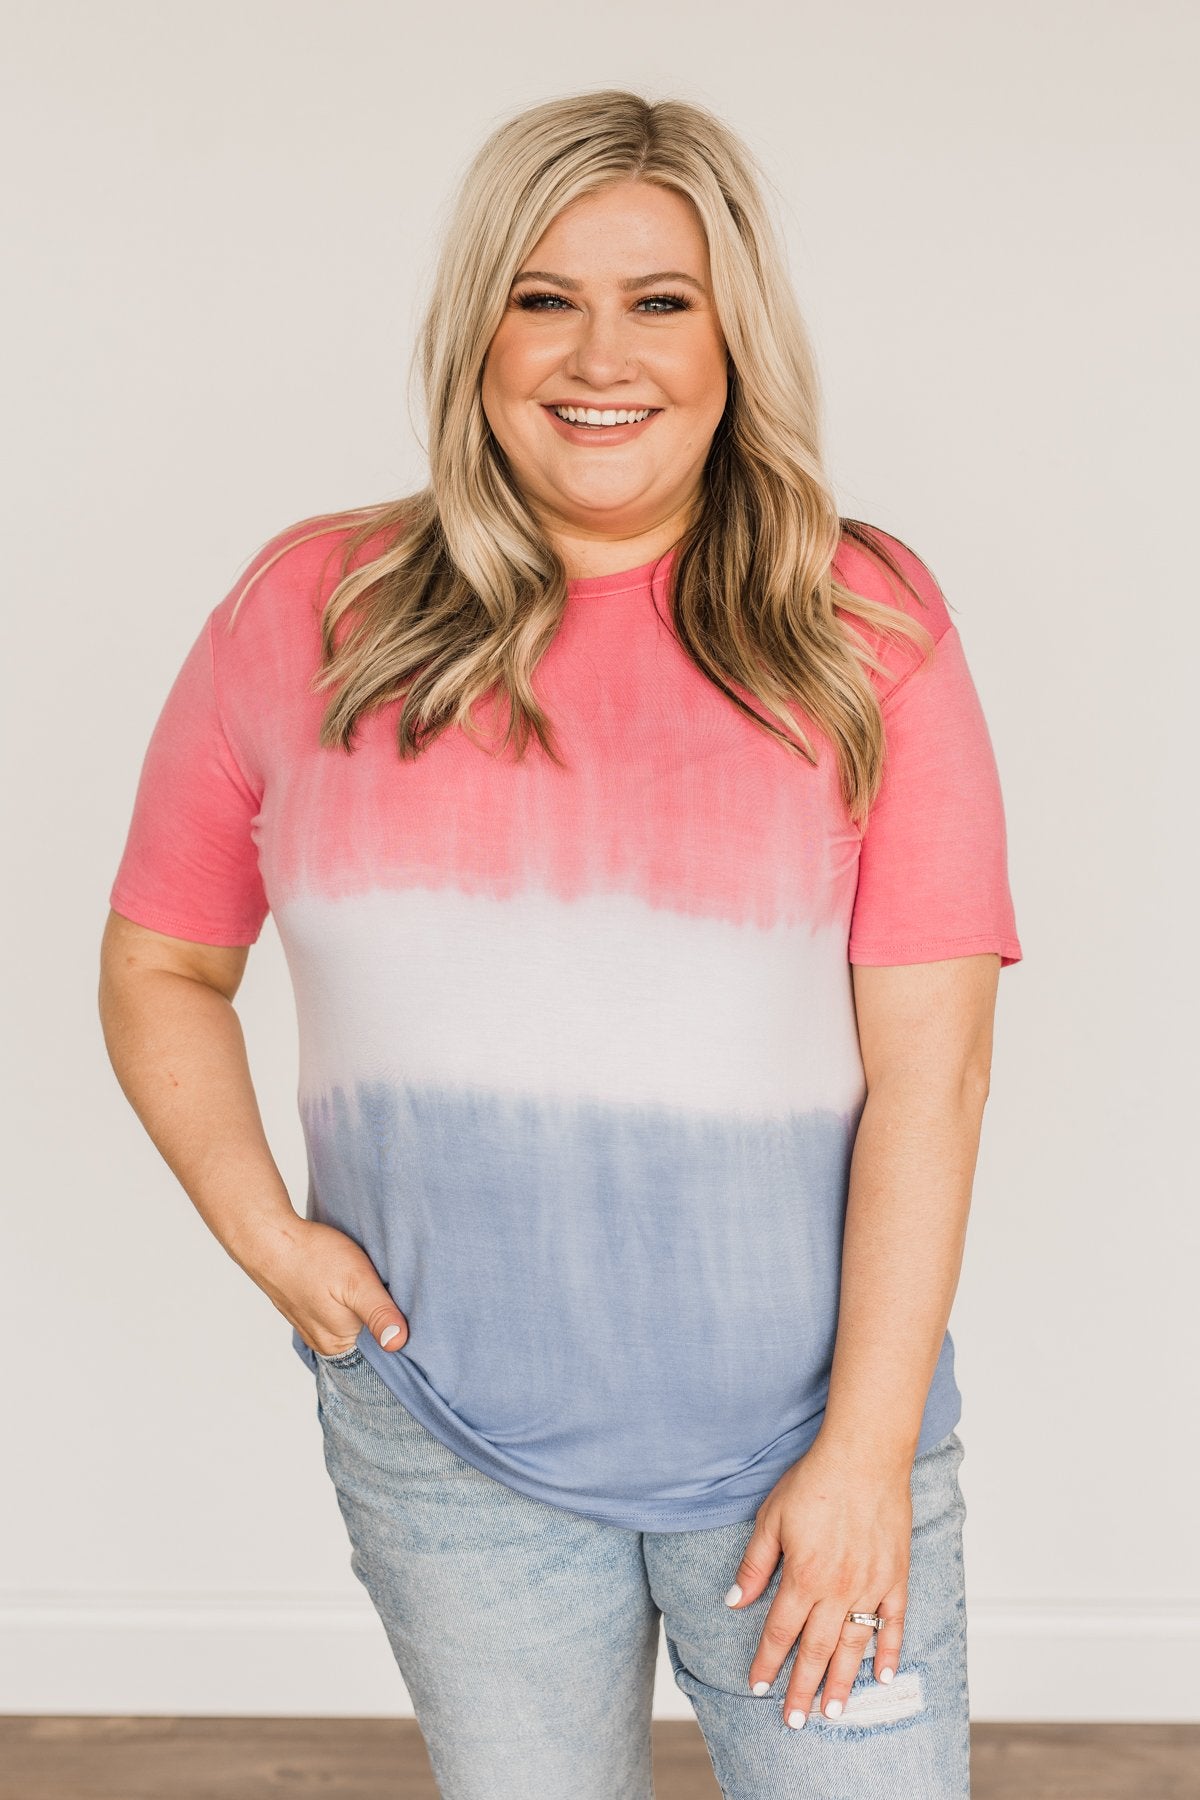 Honored & Inspired Tie-Dye Top- Red, Ivory & Blue